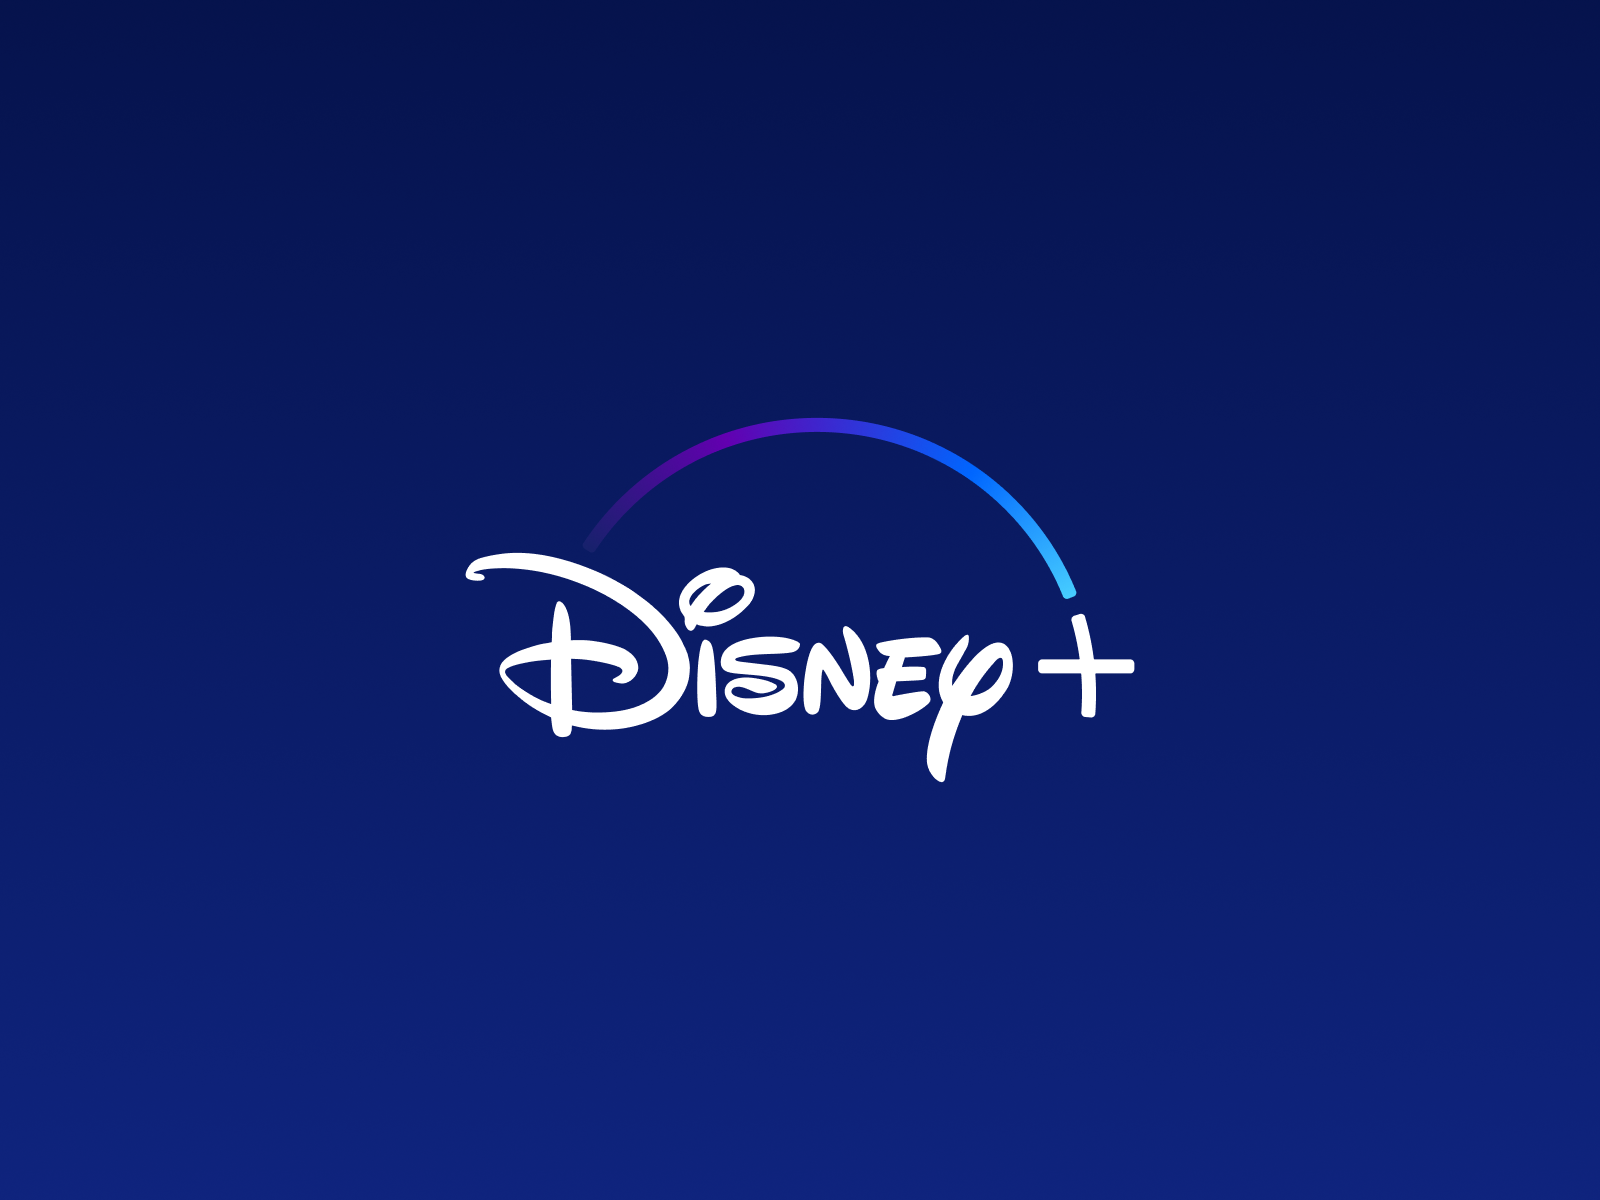 Disney Plus Revamp (Concept) by Ted Kulakevich on Dribbble